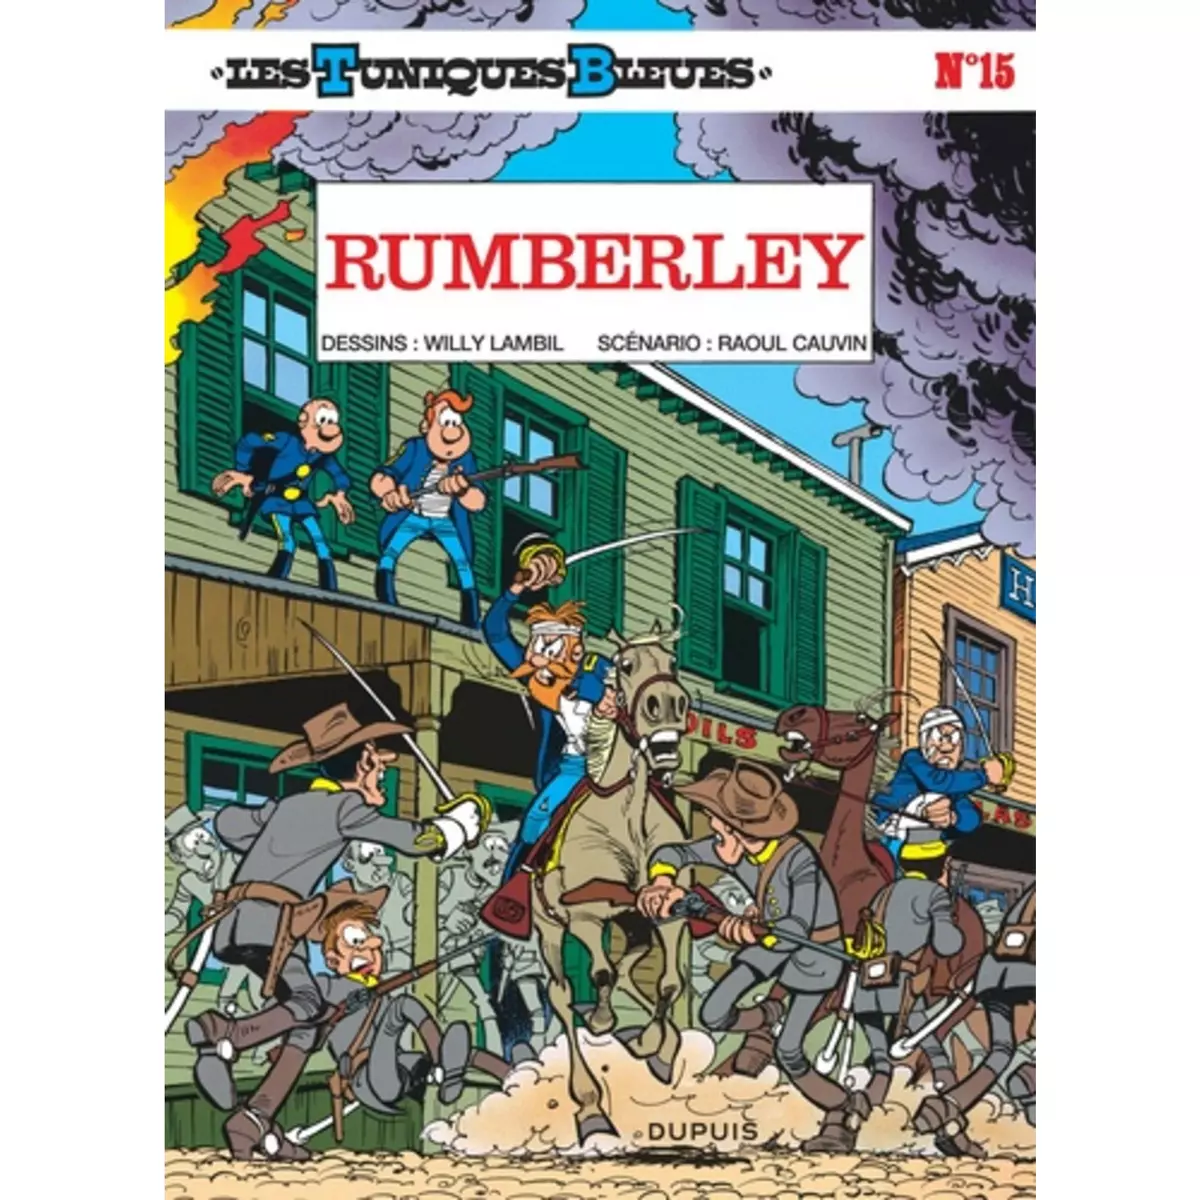  LES TUNIQUES BLEUES TOME 15 : RUMBERLEY, Cauvin Raoul